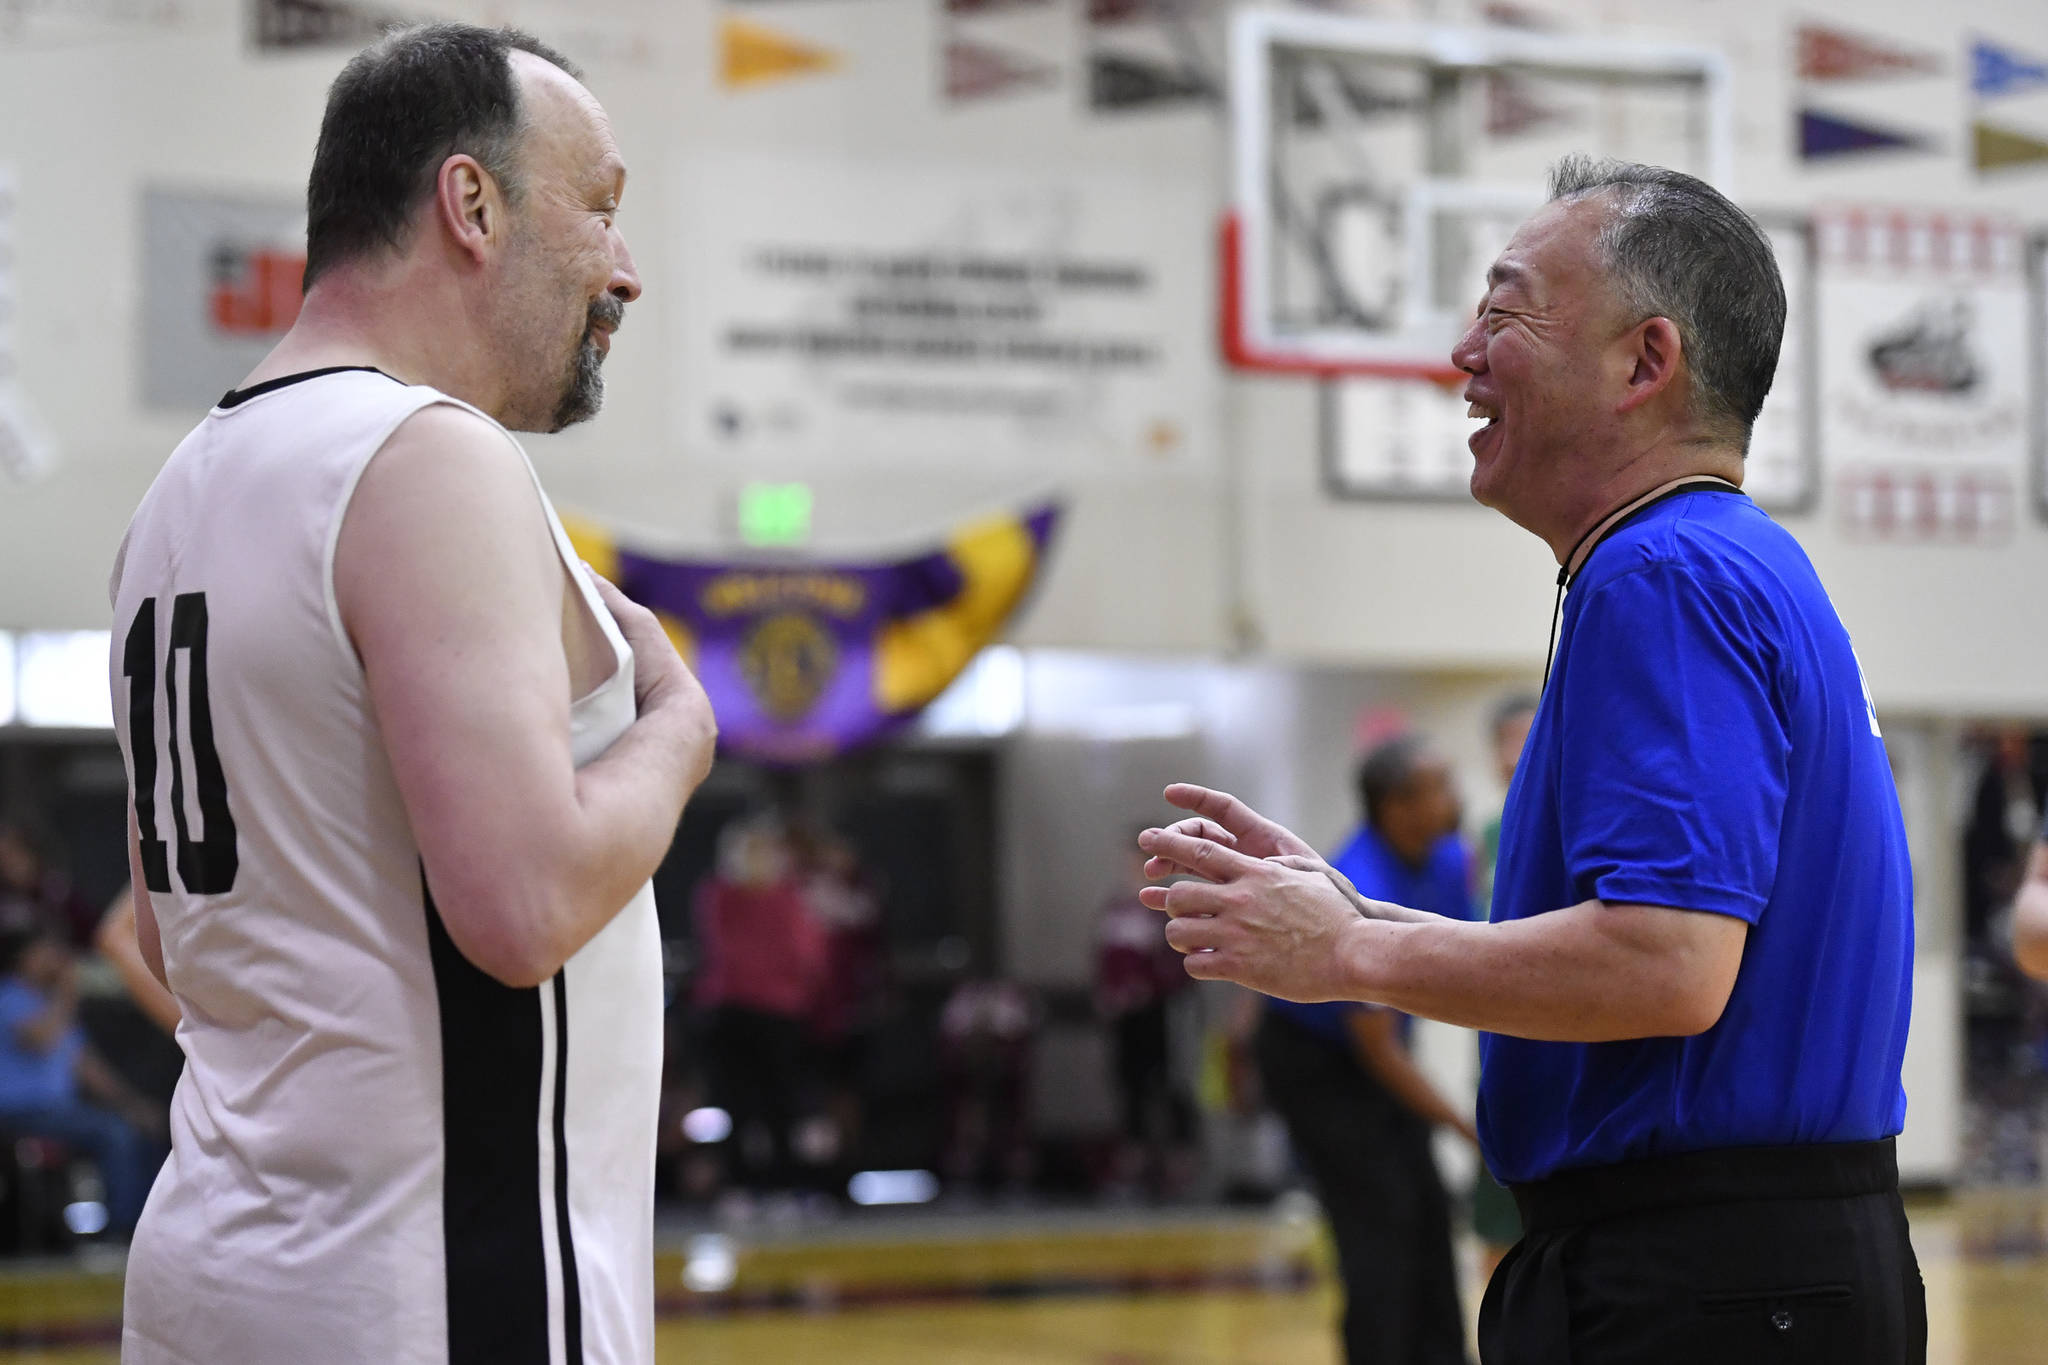 Referee Craig Tamaki, right, shares a laugh with Yakutat’s Greg Indreland during a masters bracket game against Sitka at the Juneau Lions Club 73rd Annual Gold Medal Basketball Tournament at Juneau-Douglas High School: Yadaa.at Kalé on Wednesday, March 20, 2019. Tamaki has come back to referee the tournament since 2011. (Michael Penn | Juneau Empire)